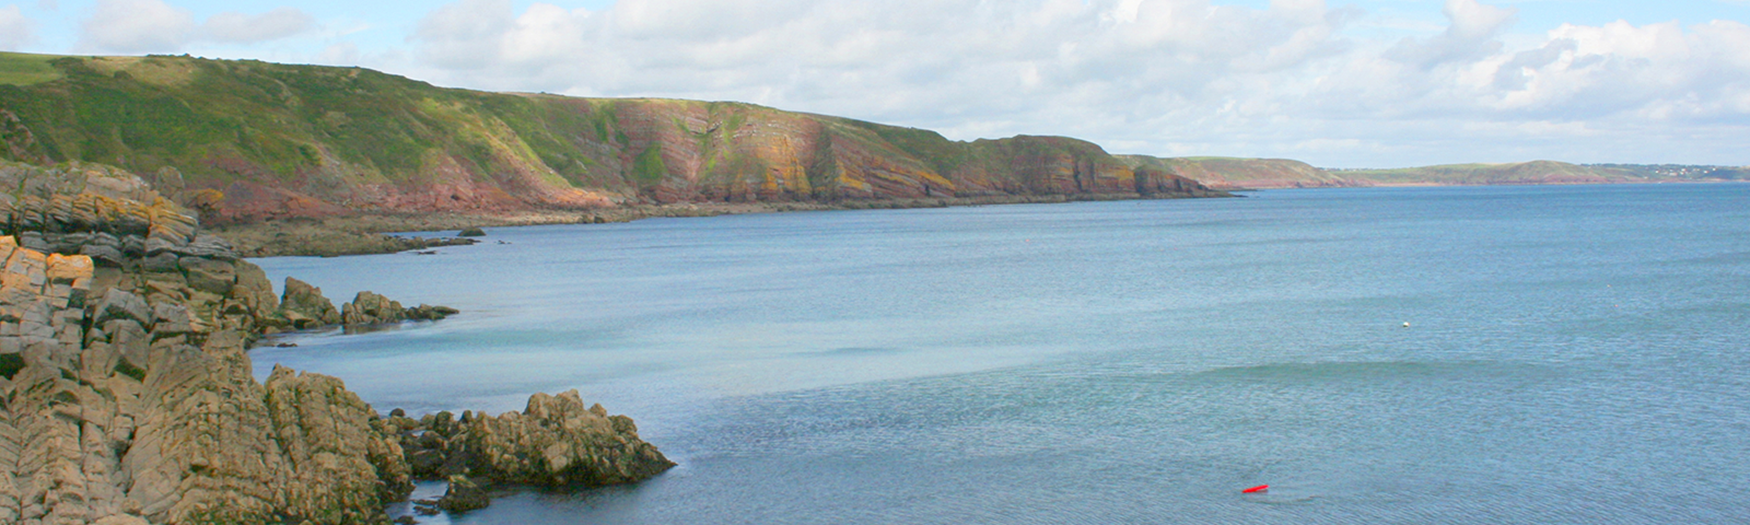 Stackpole Holiday Cottages Self Catering Coastal Cottages Of